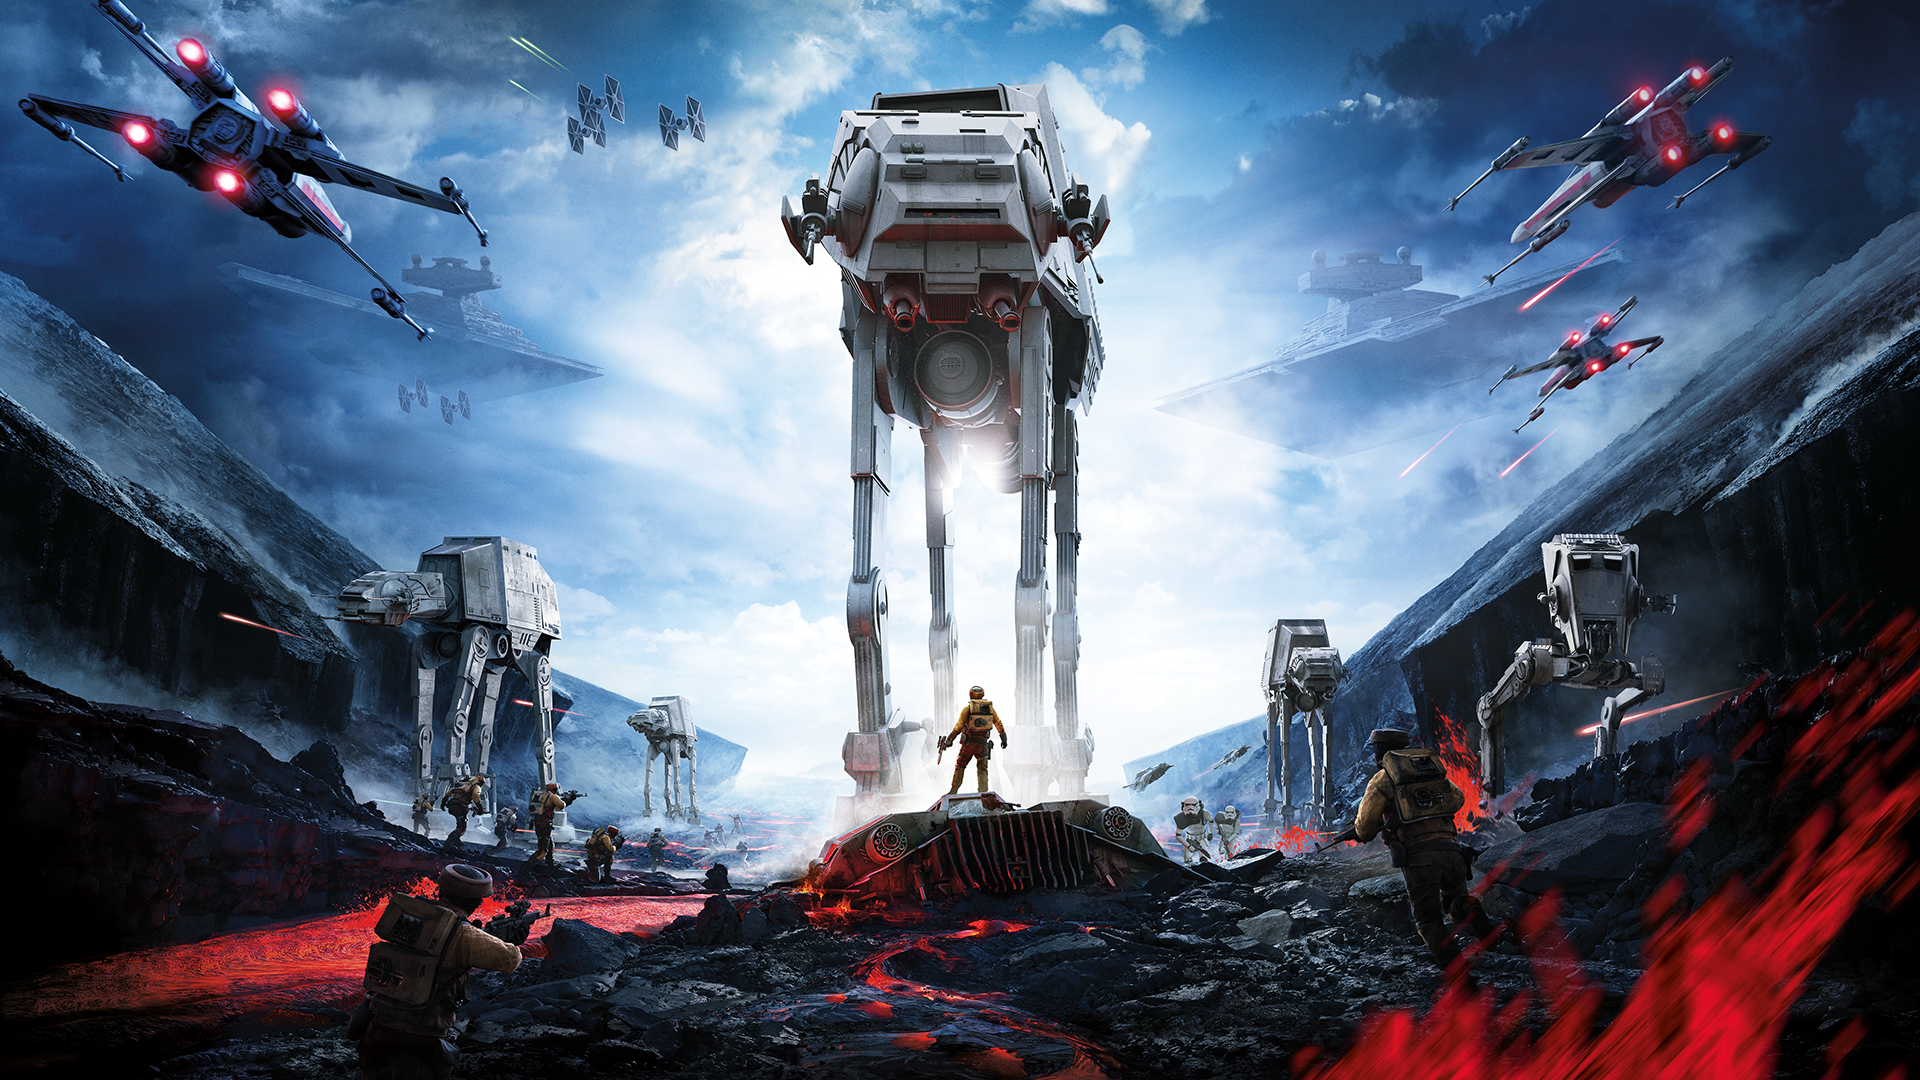 General 1920x1080 Star Wars Star Wars: Battlefront video games battlefields science fiction PC gaming AT-AT Imperial Forces X-wing video game art EA DICE Electronic Arts